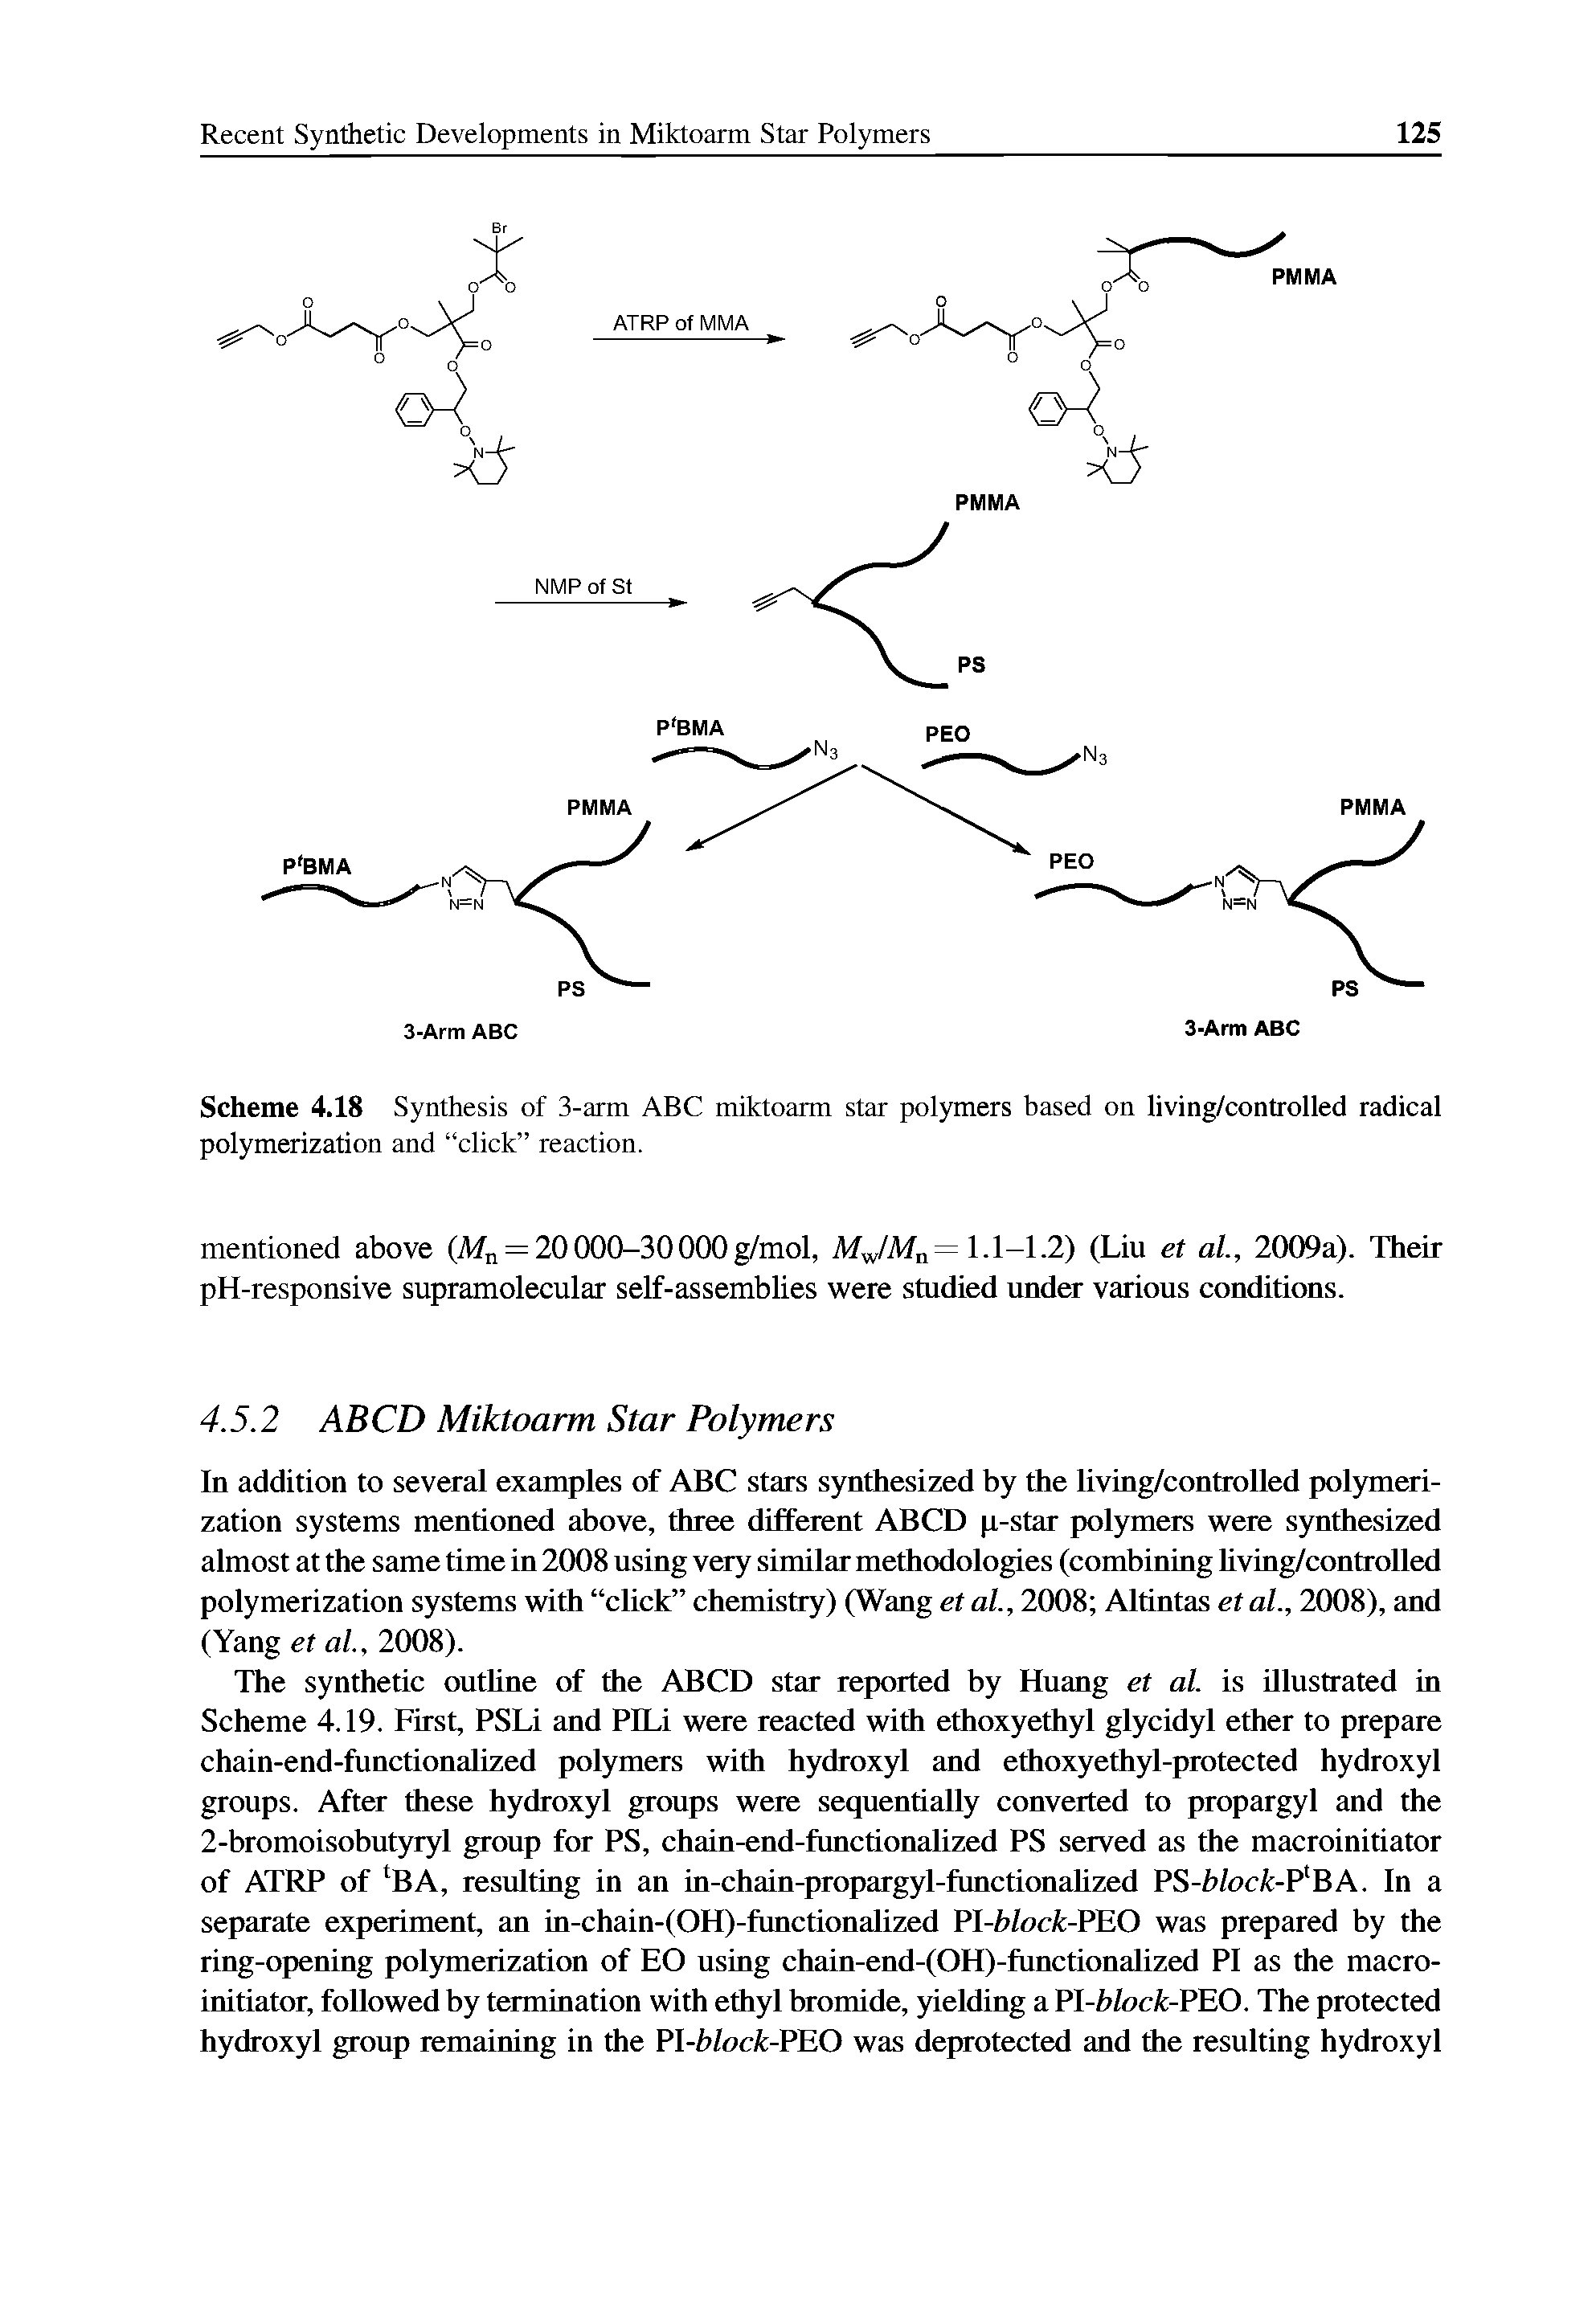 Scheme 4.18 Synthesis of 3-arm ABC miktoarm star polymers based on living/controlled radical polymerization and click reaction.